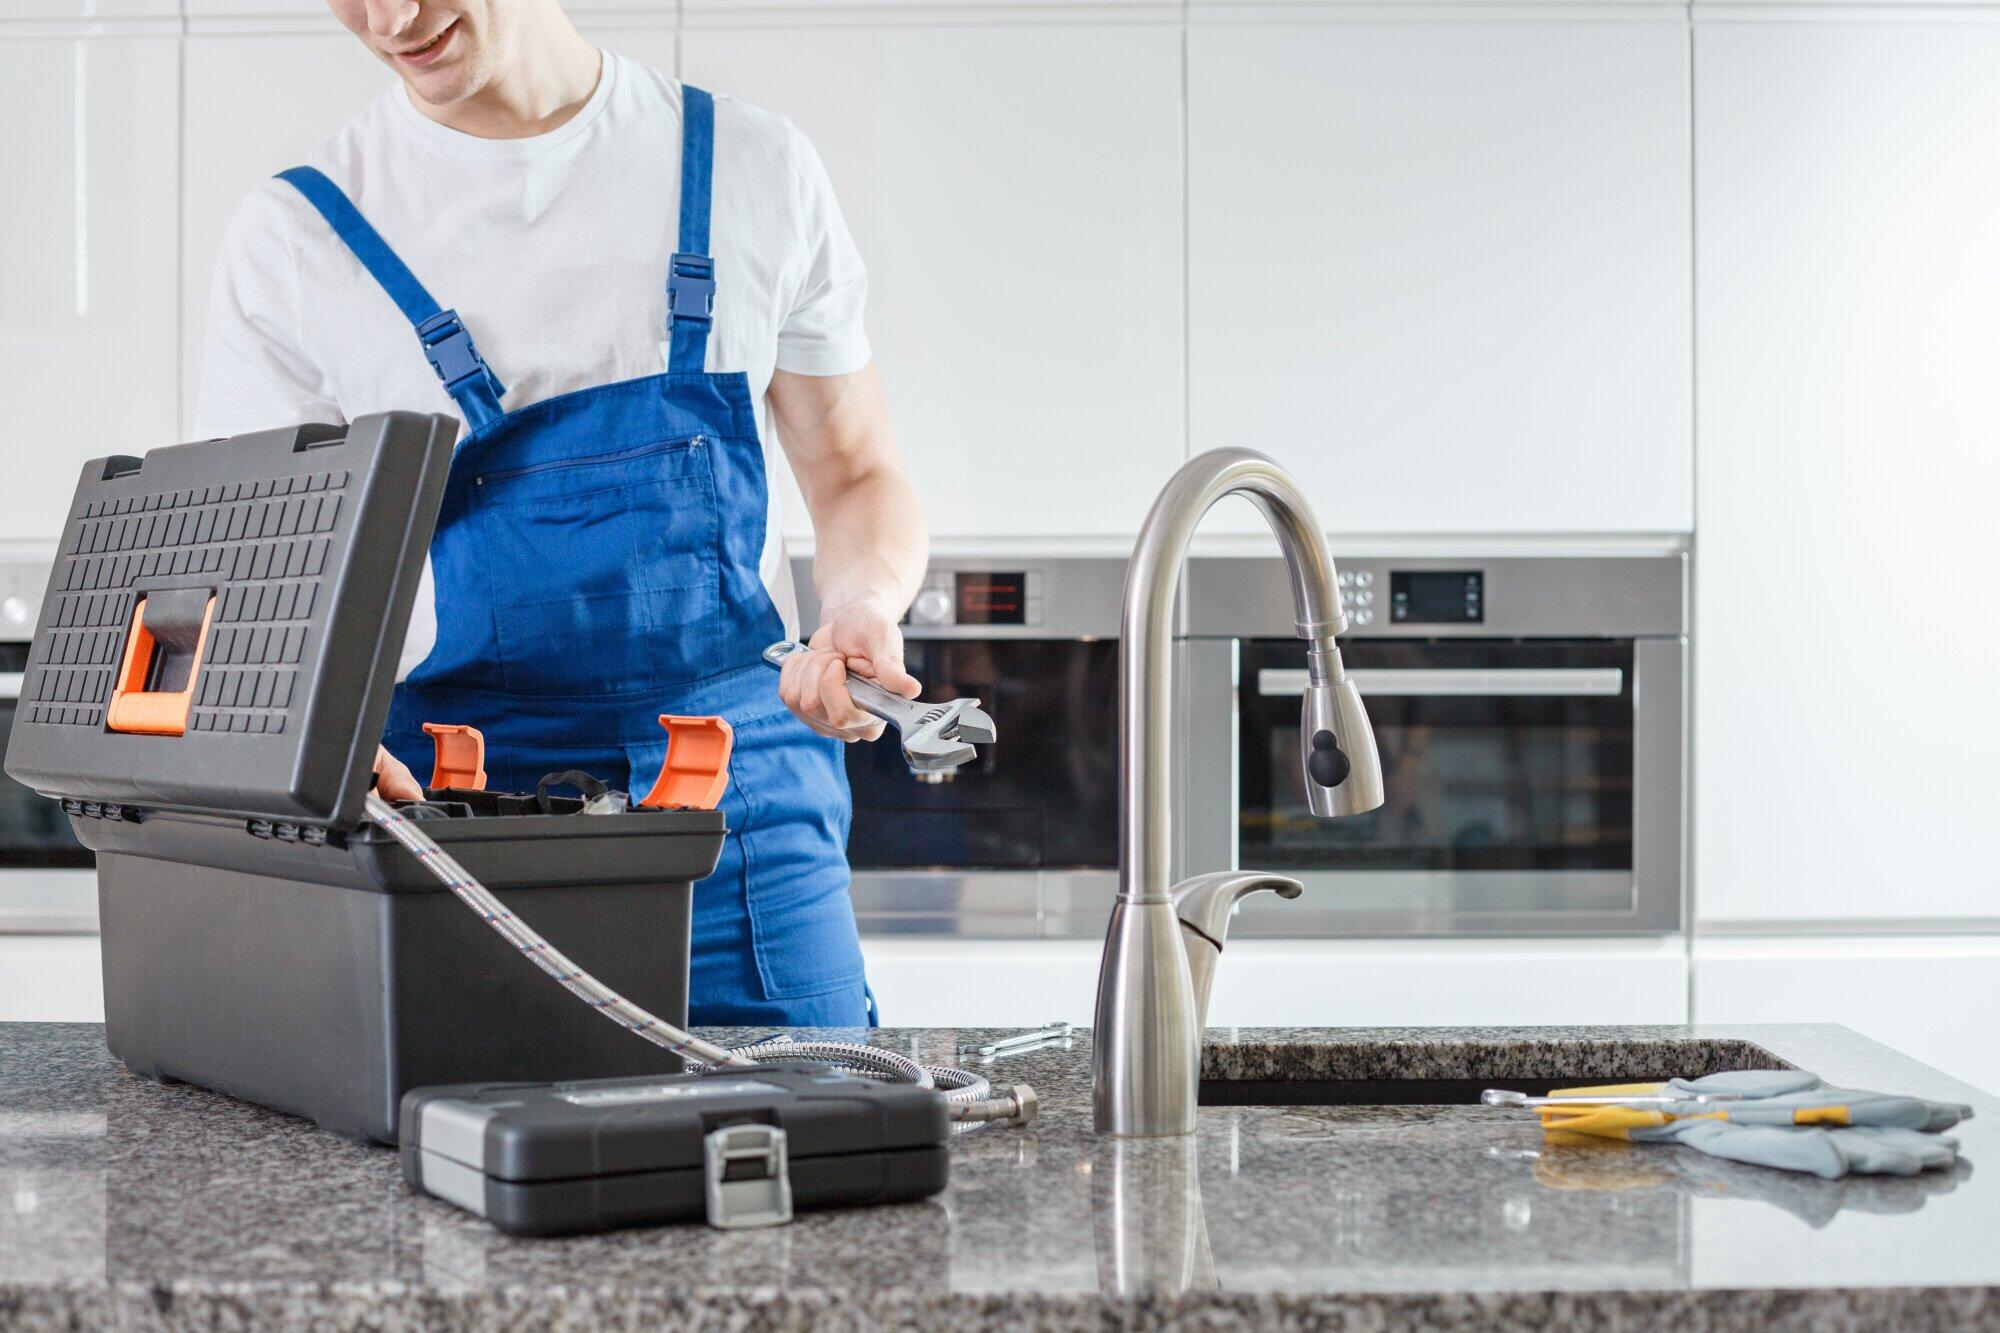 4 Essential Questions to Ask Your Plumbing Contractor Before Hiring Them